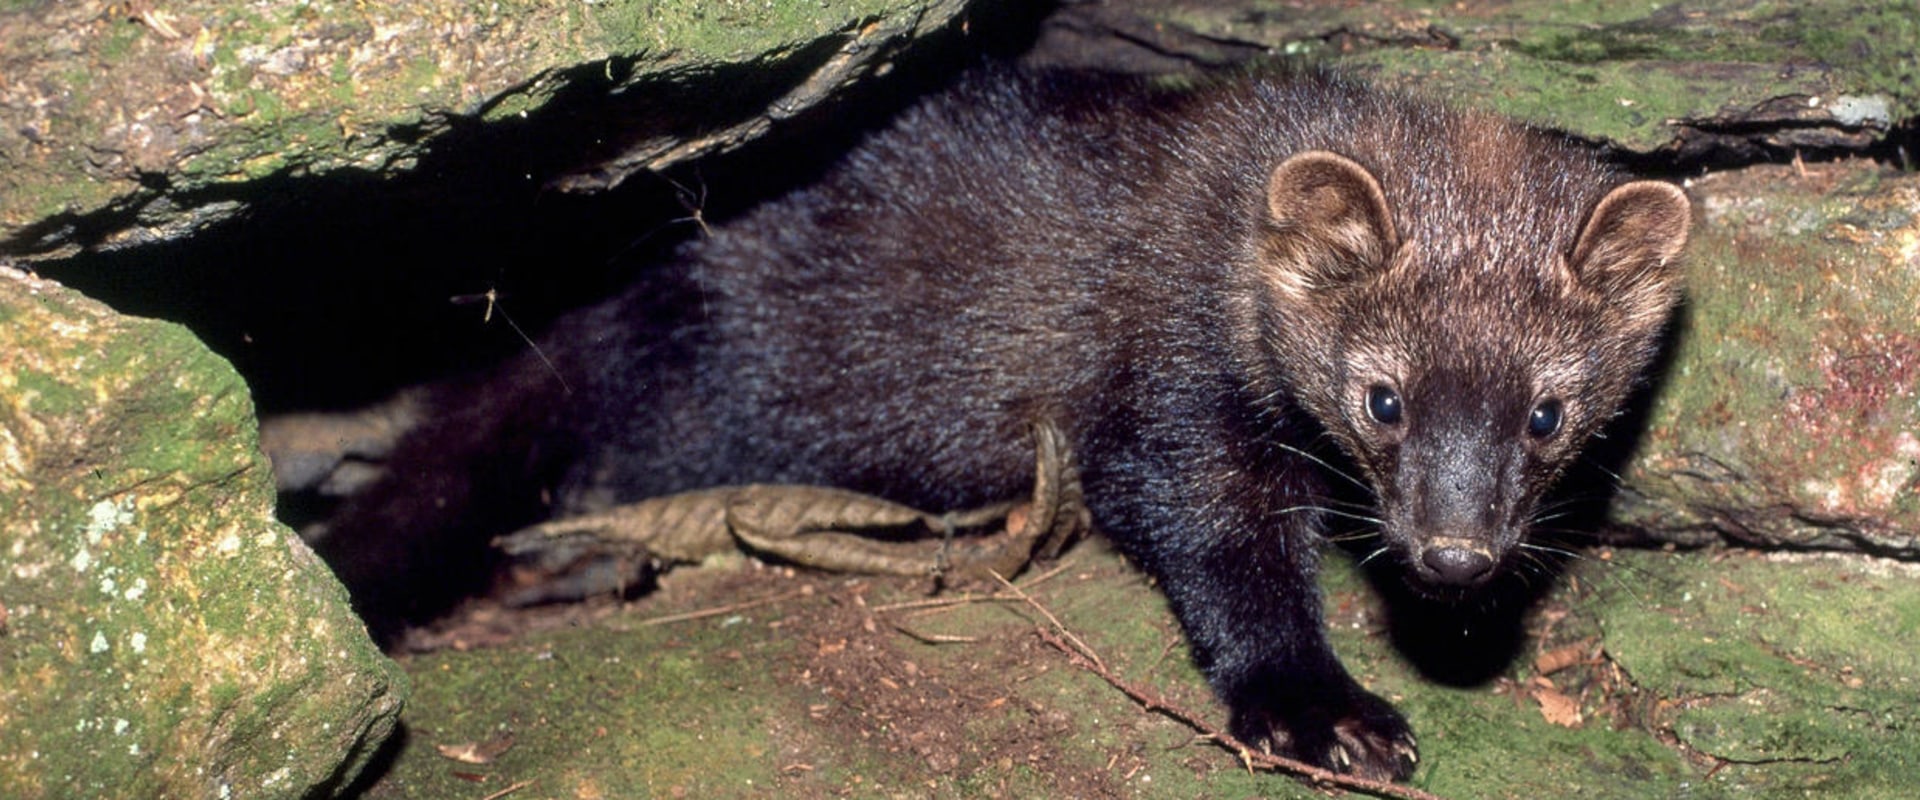 What type of habitat do fishers live in?